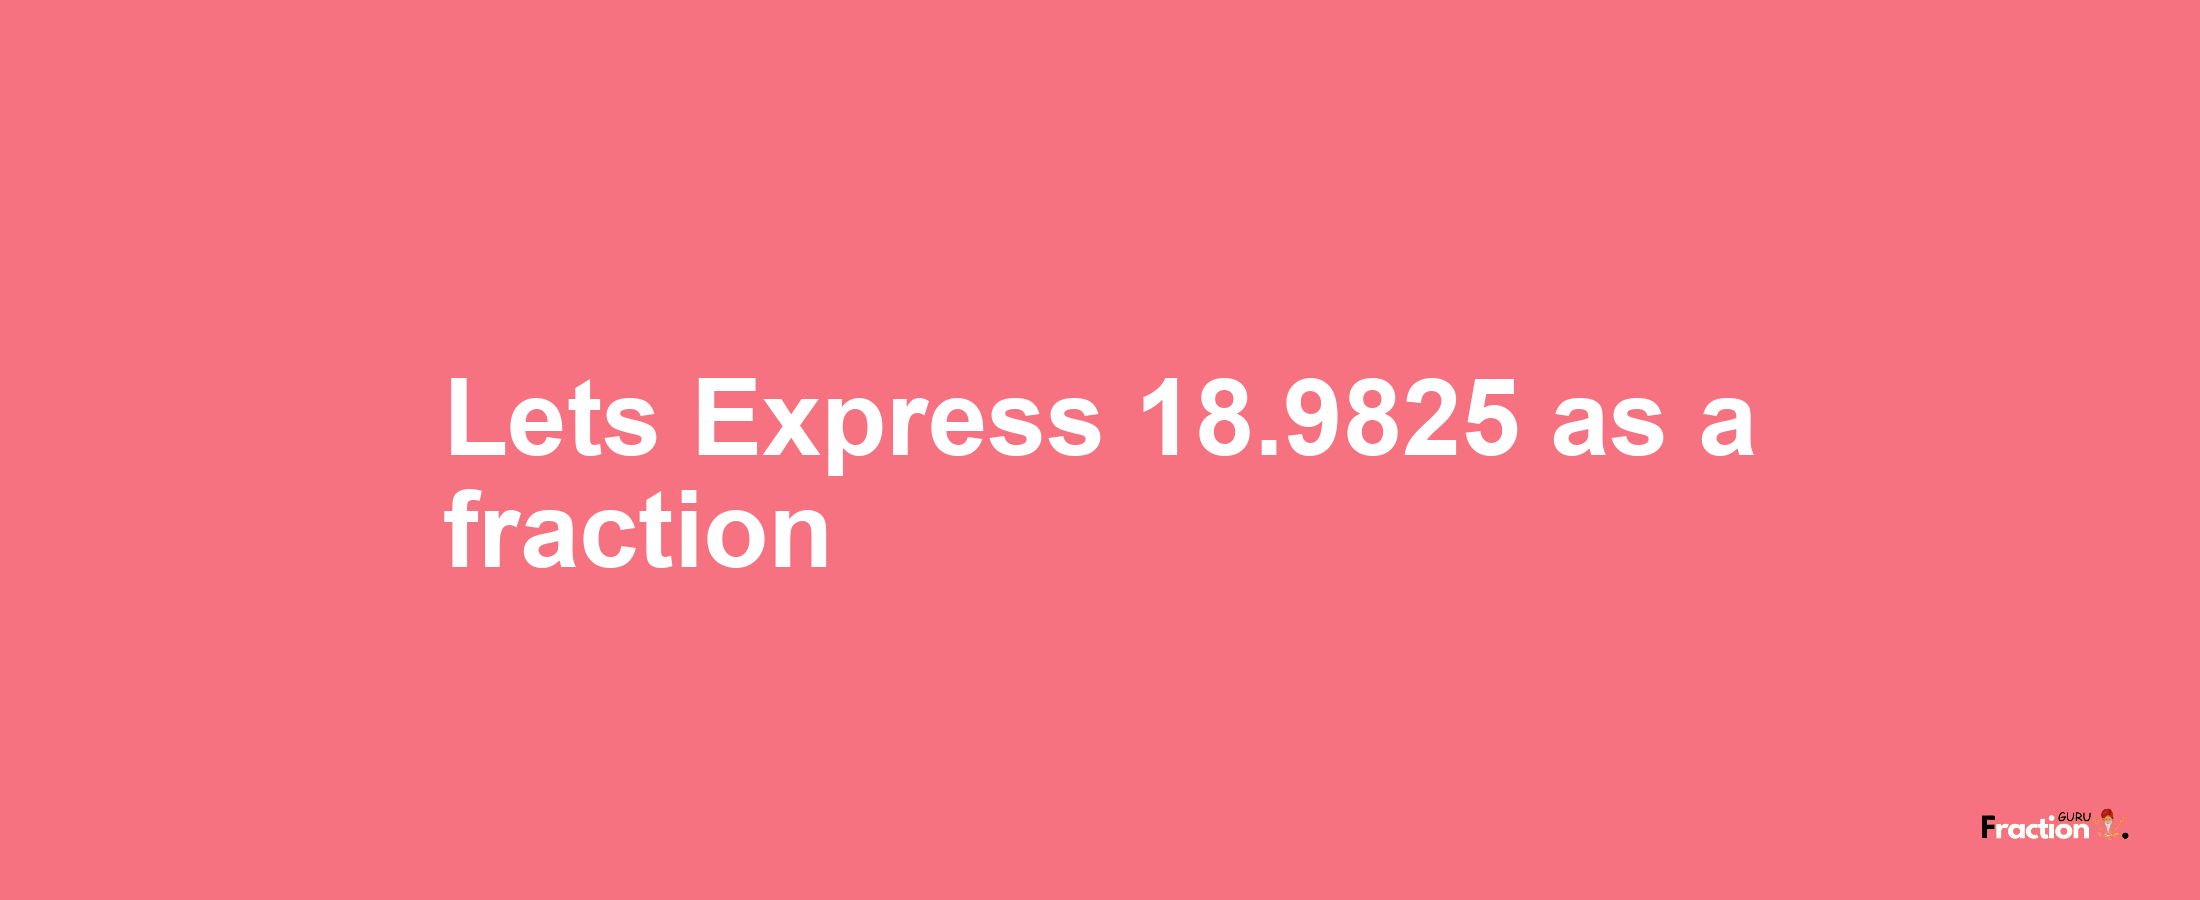 Lets Express 18.9825 as afraction